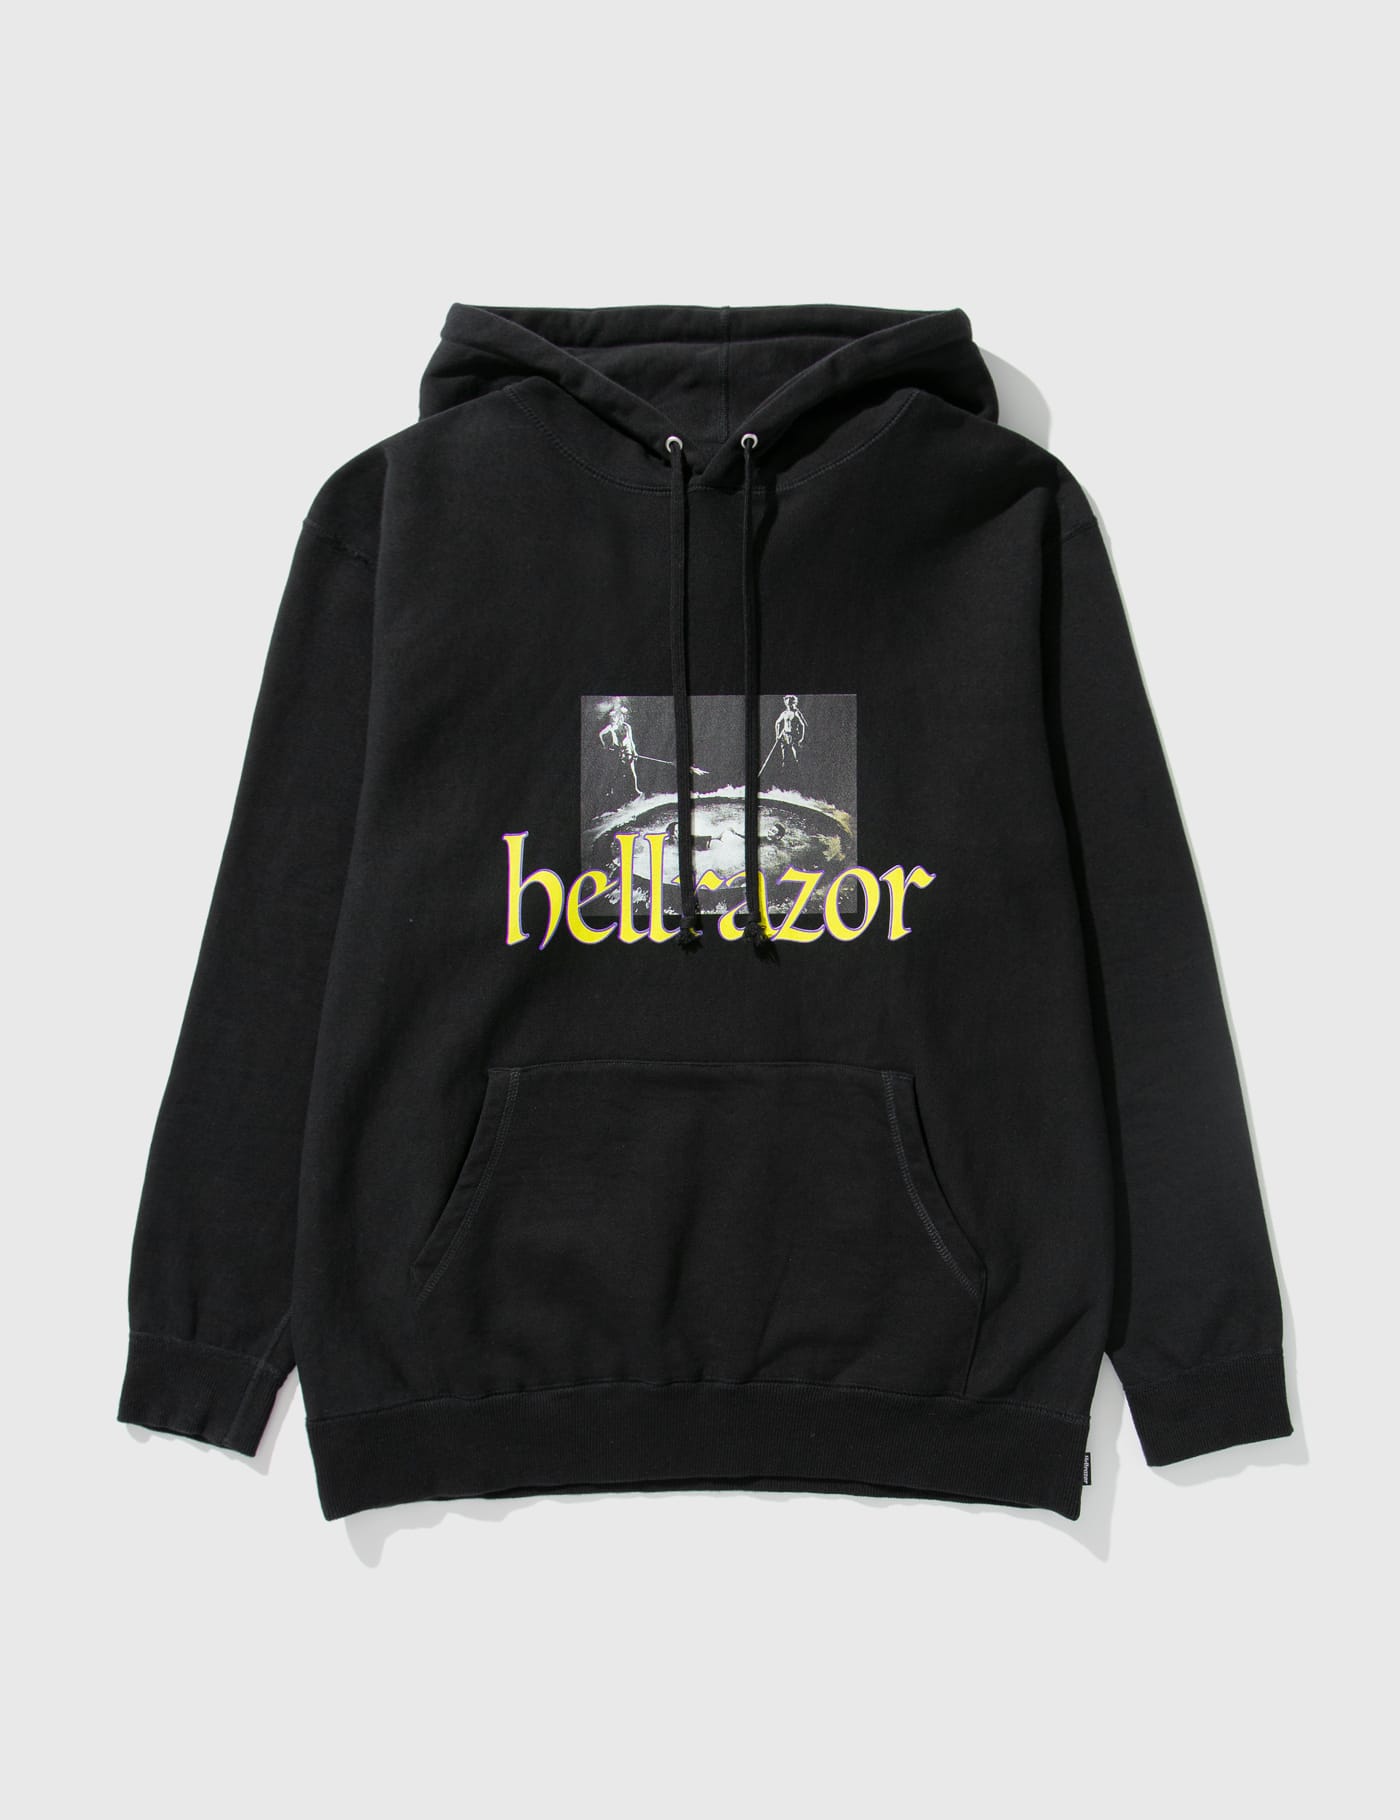 Hellrazor | HBX - Globally Curated Fashion and Lifestyle by Hypebeast